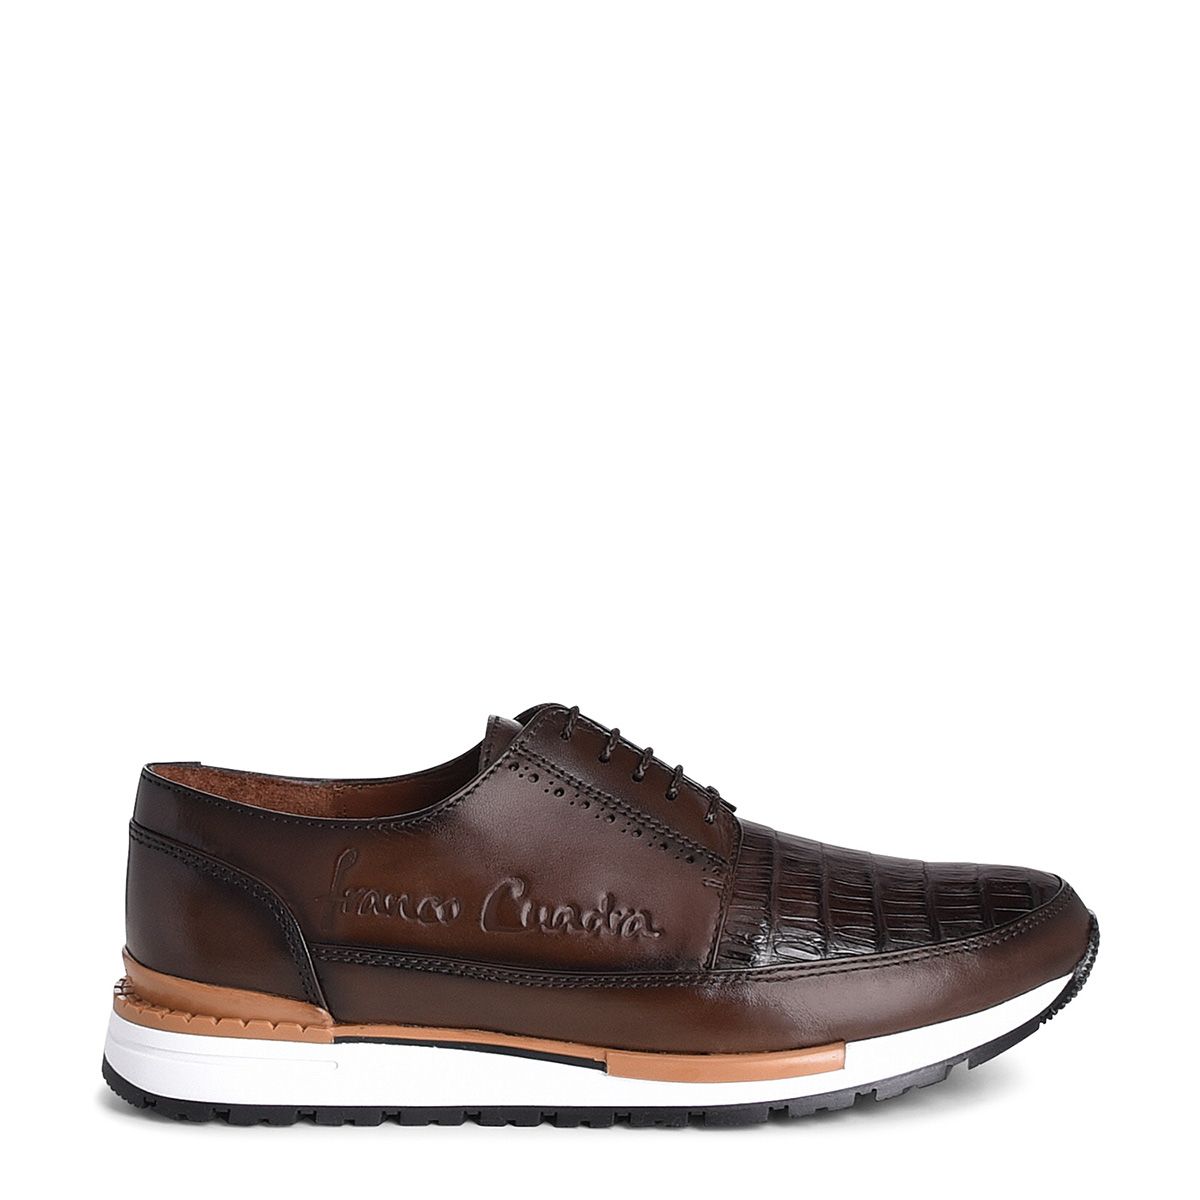 127CWTS - Cuadra chocolate casual fashion caiman derby sneakers for men-Kuet.us